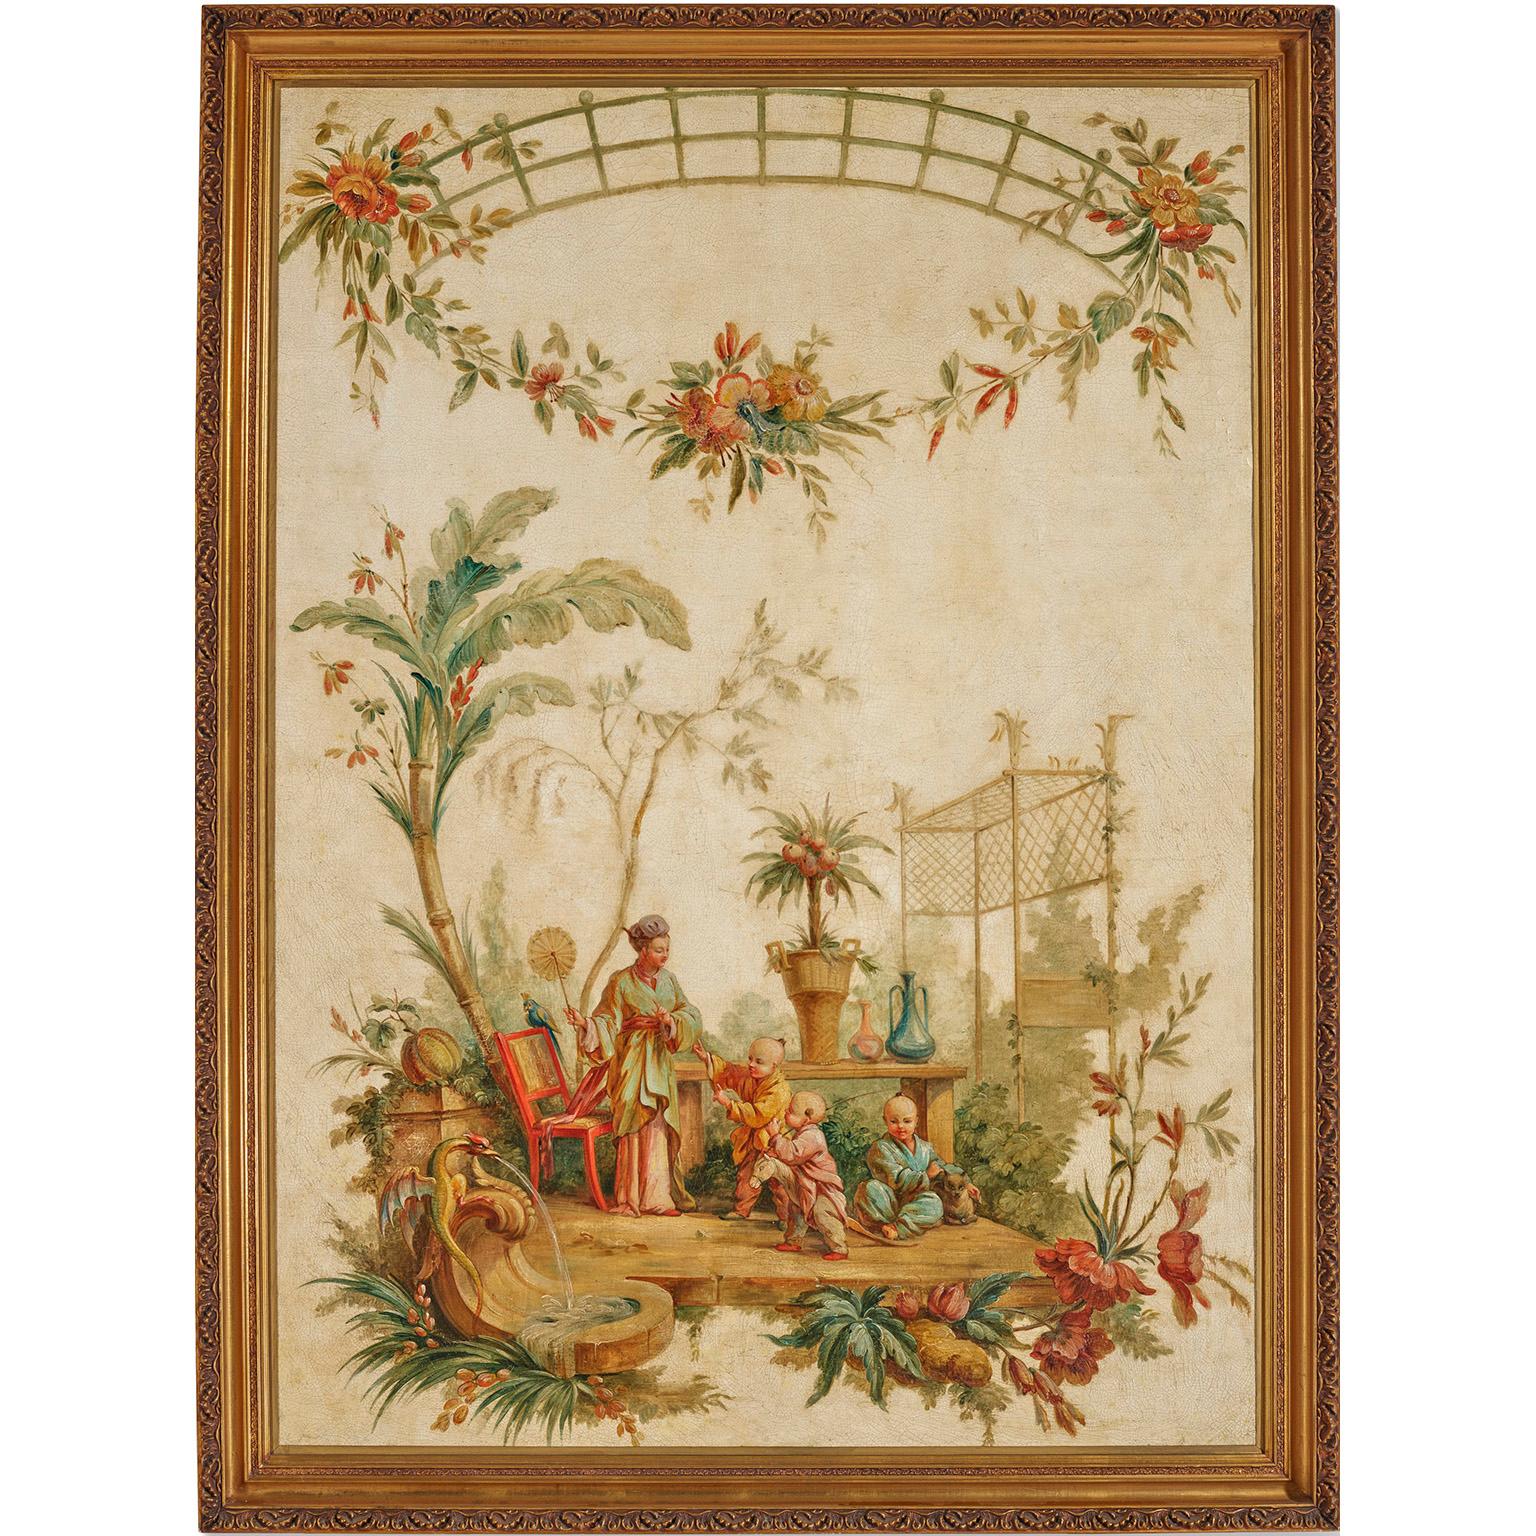 A fine pair of French 18th-19th century whimsical rococo style chinoiserie oil on canvas, circle of Jean-Baptiste Pillement. (French, 1728-1808). One oil painting depicting an outdoor patio scene of a standing young mother, holding a fan, with her